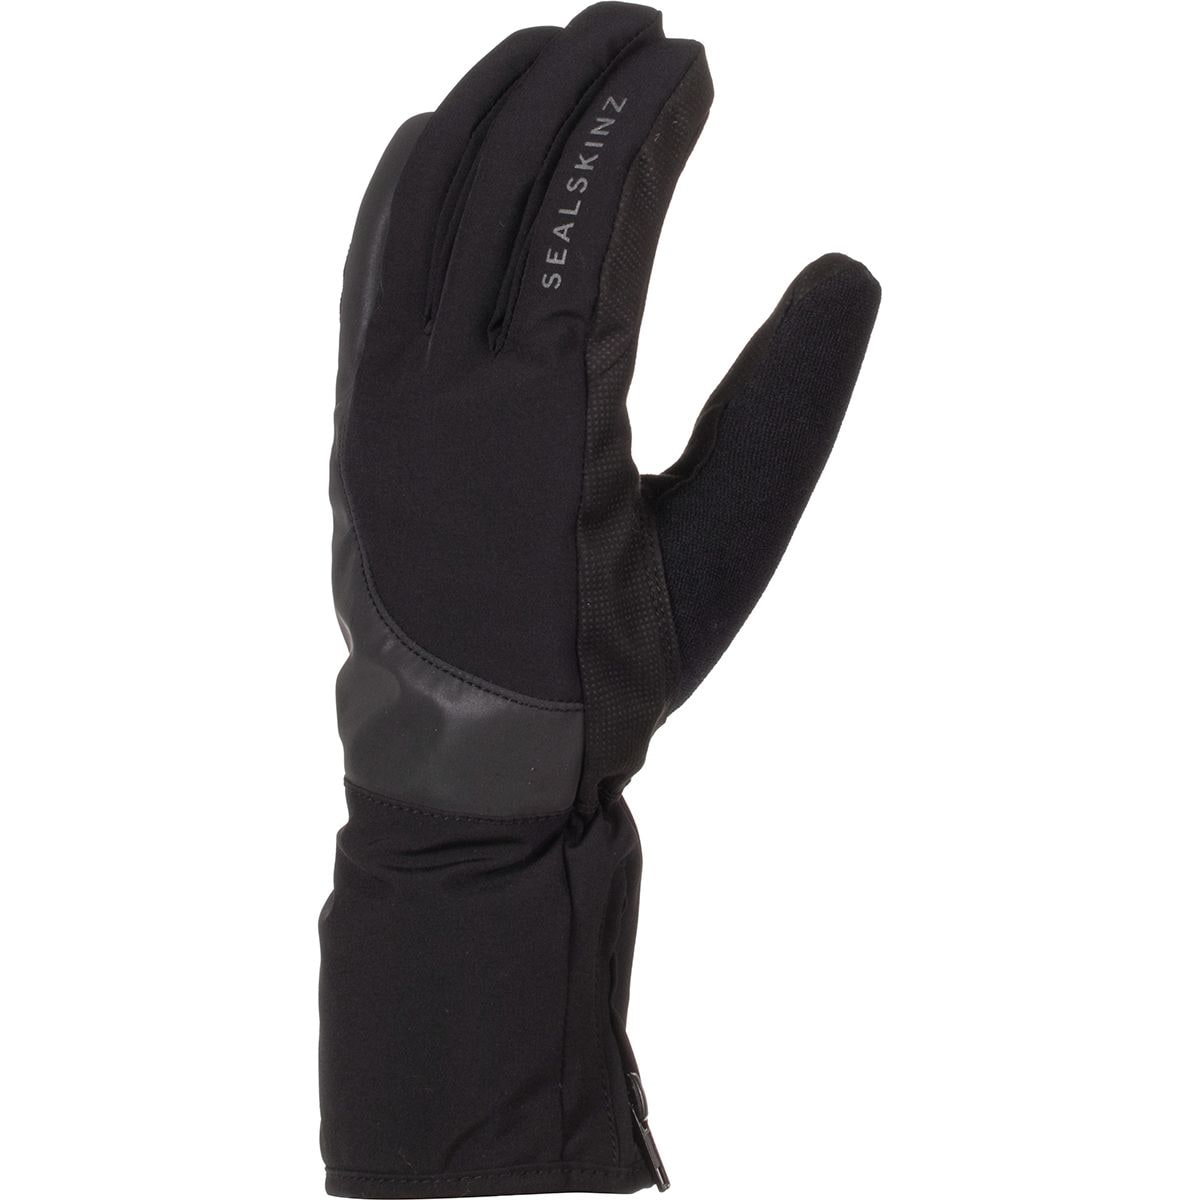 SealSkinz Thermal Reflective Cycle Glove - Men's